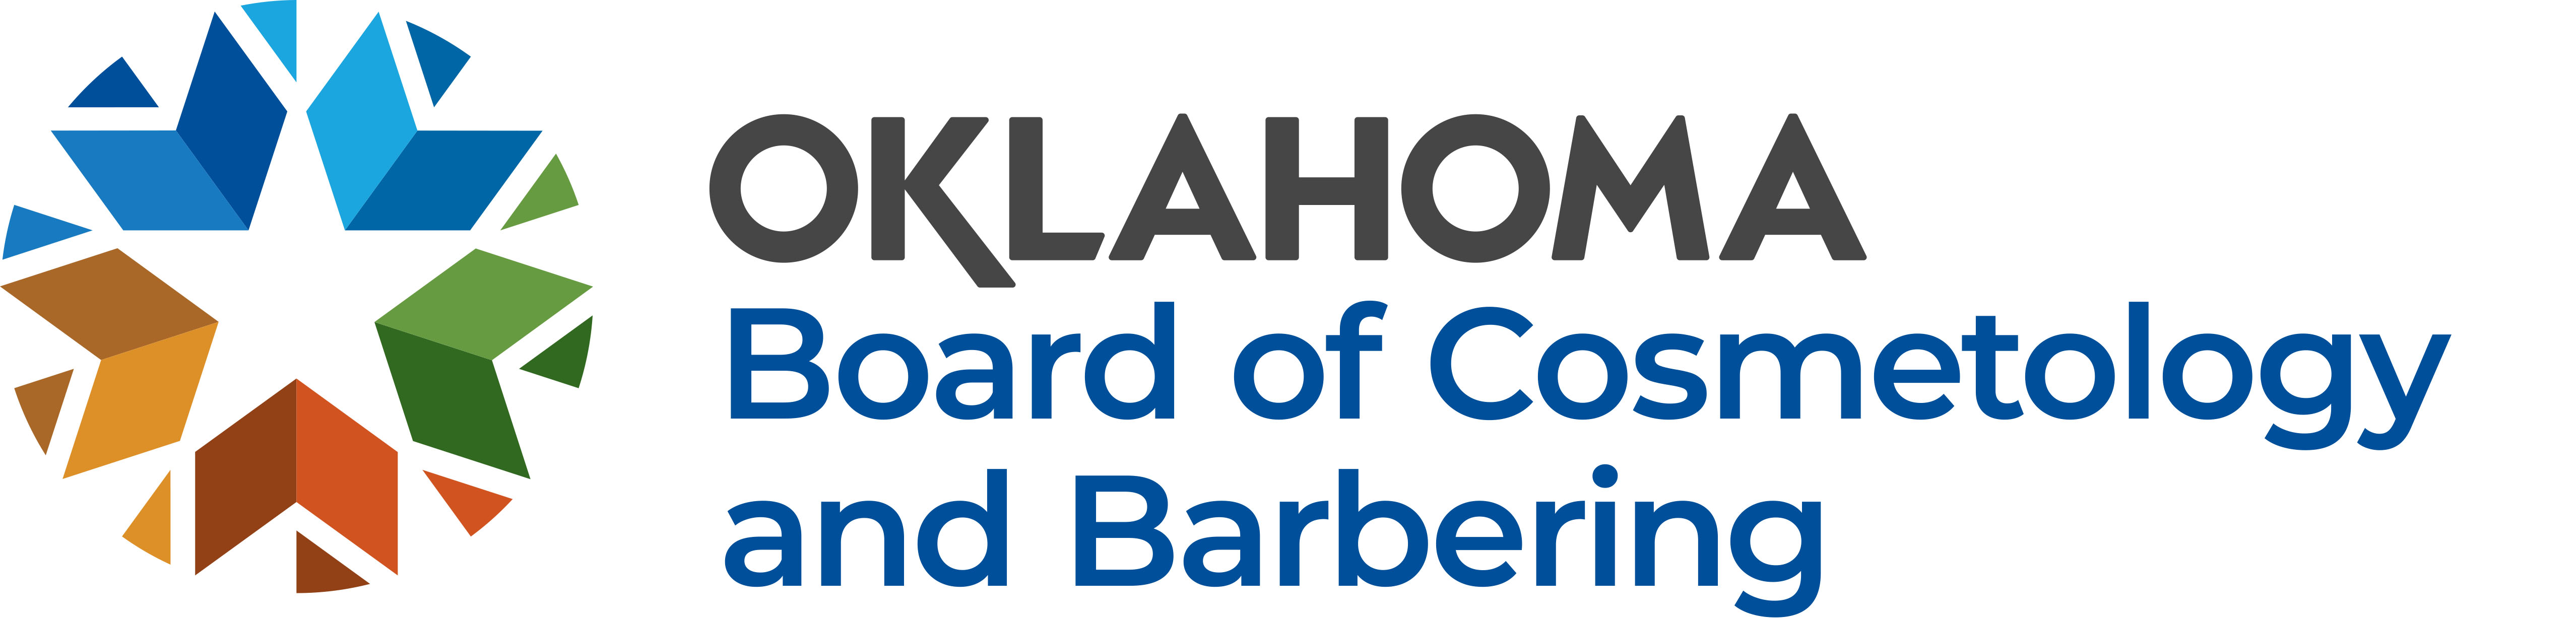 logo for Oklahoma State Board of Cosemetology and Barbering